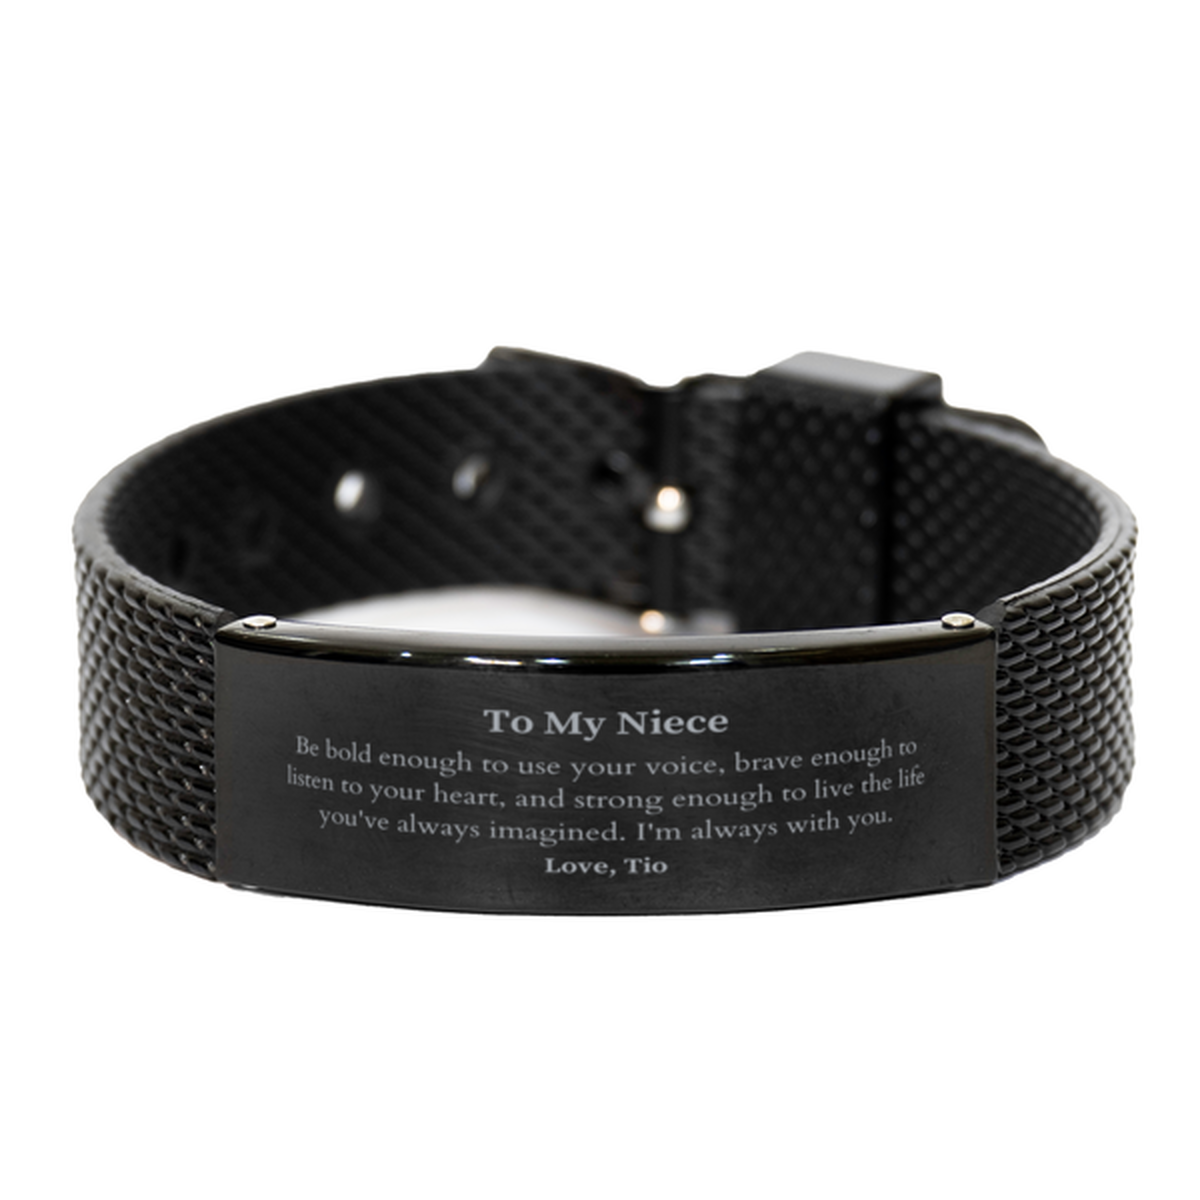 Keepsake Niece Black Shark Mesh Bracelet Gift Idea Graduation Christmas Birthday Niece from Tio, Niece Be bold enough to use your voice, brave enough to listen to your heart. Love, Tio